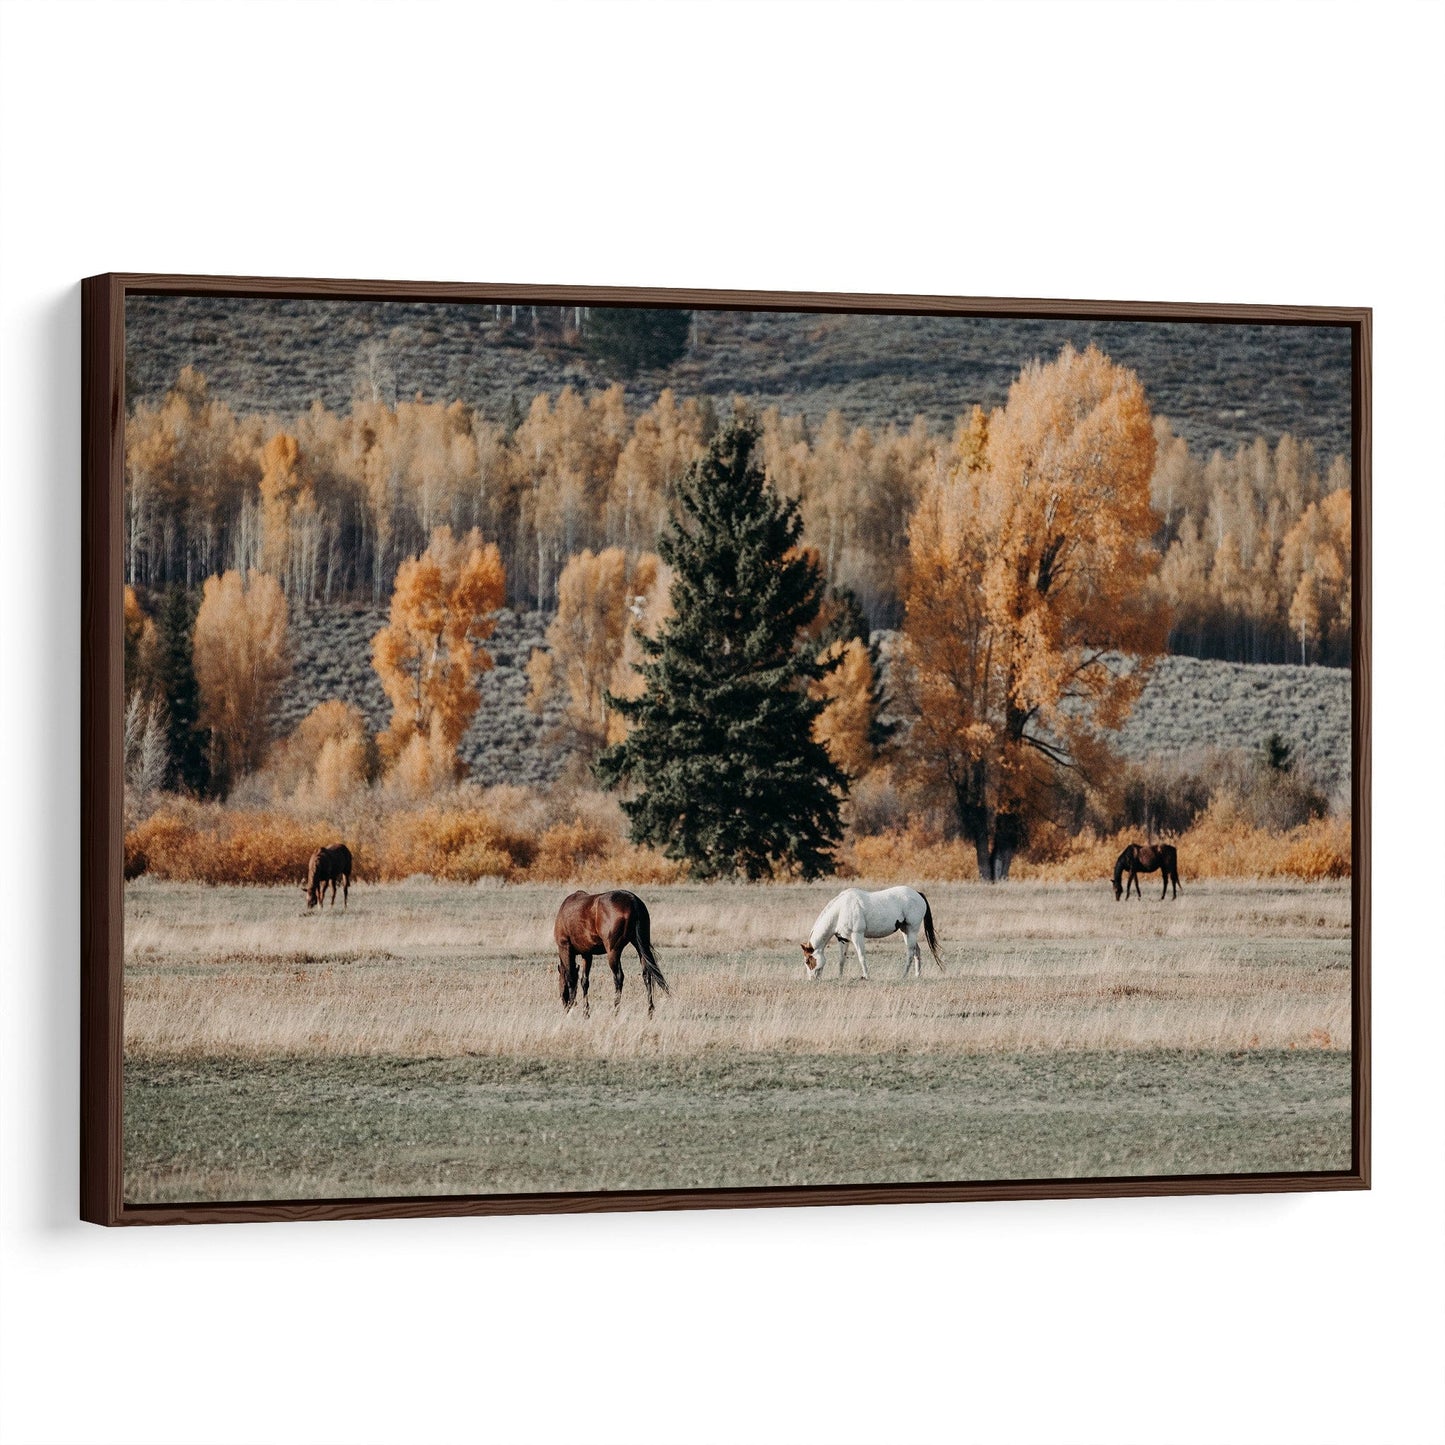 Horses in Fall Foliage Large Canvas Art Canvas-Walnut Frame / 12 x 18 Inches Wall Art Teri James Photography